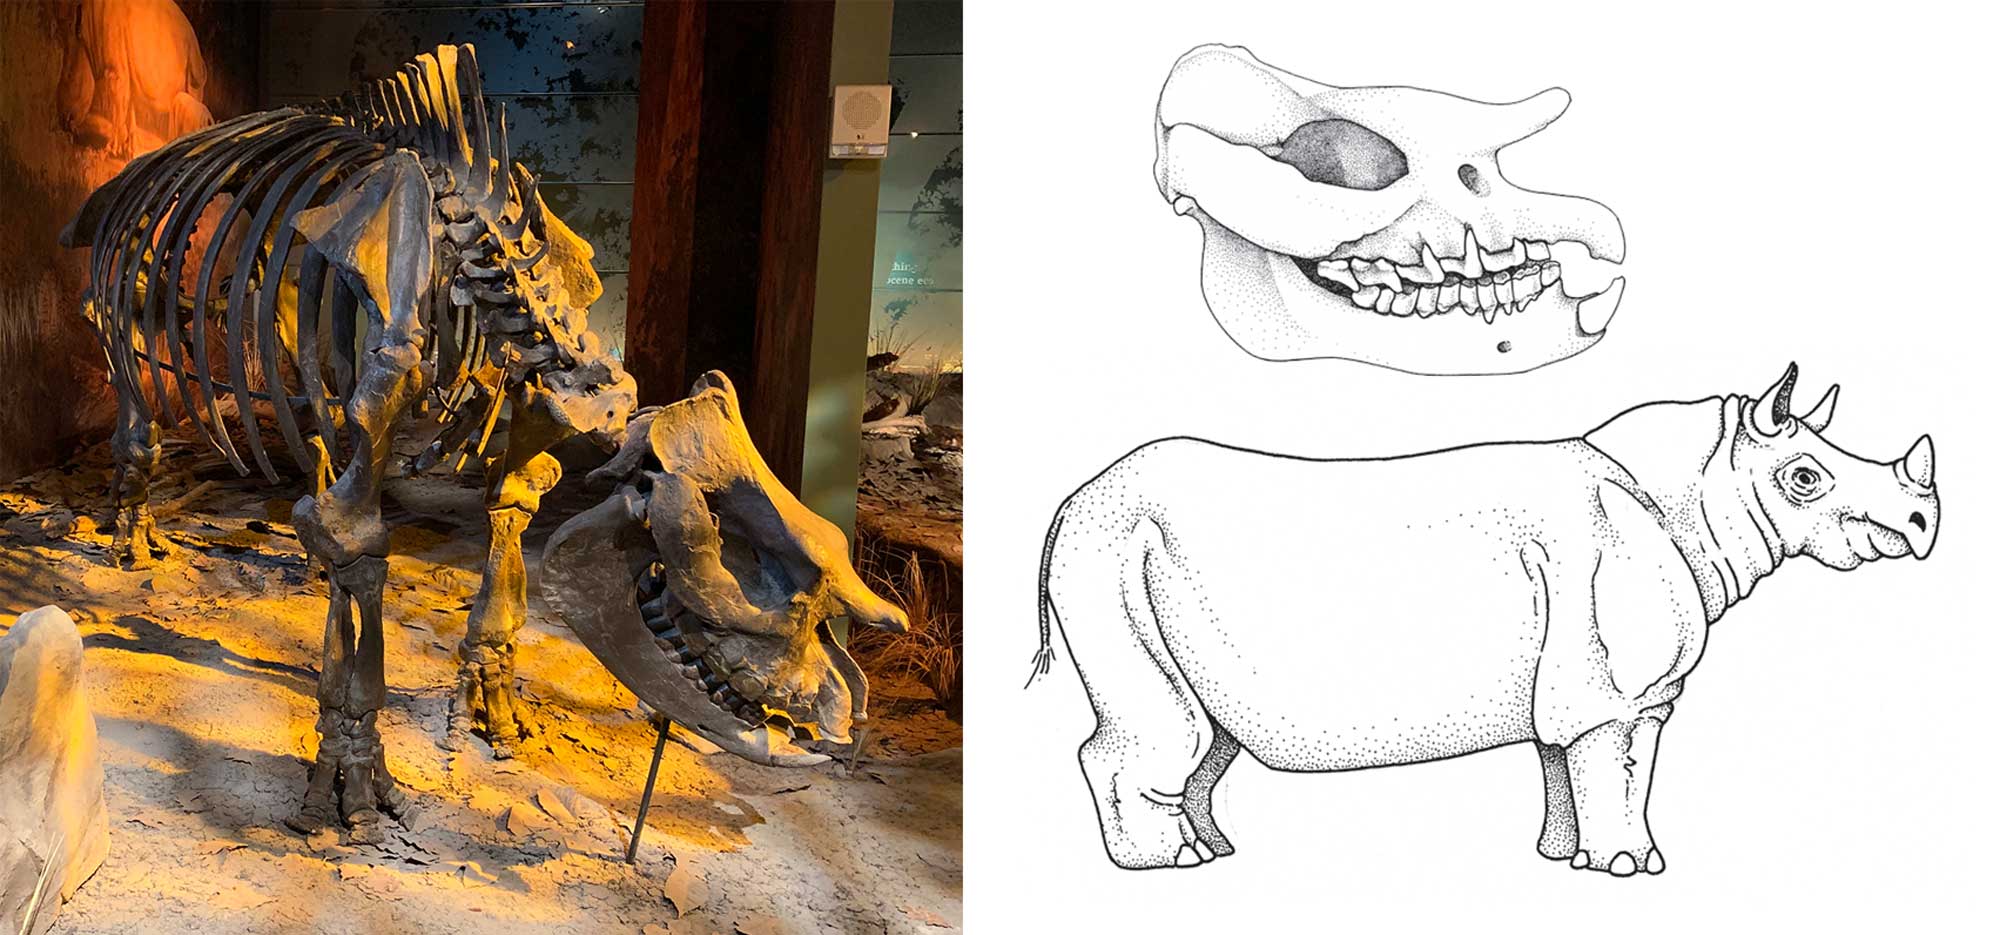 2-Panel figure. Panel 1. Photograph the the skeleton of the North American rhino Teleoceras on display. Panel 2. Drawing showing a reconstruction of Teleoceras underneath a drawing of a Teleoceras skull.